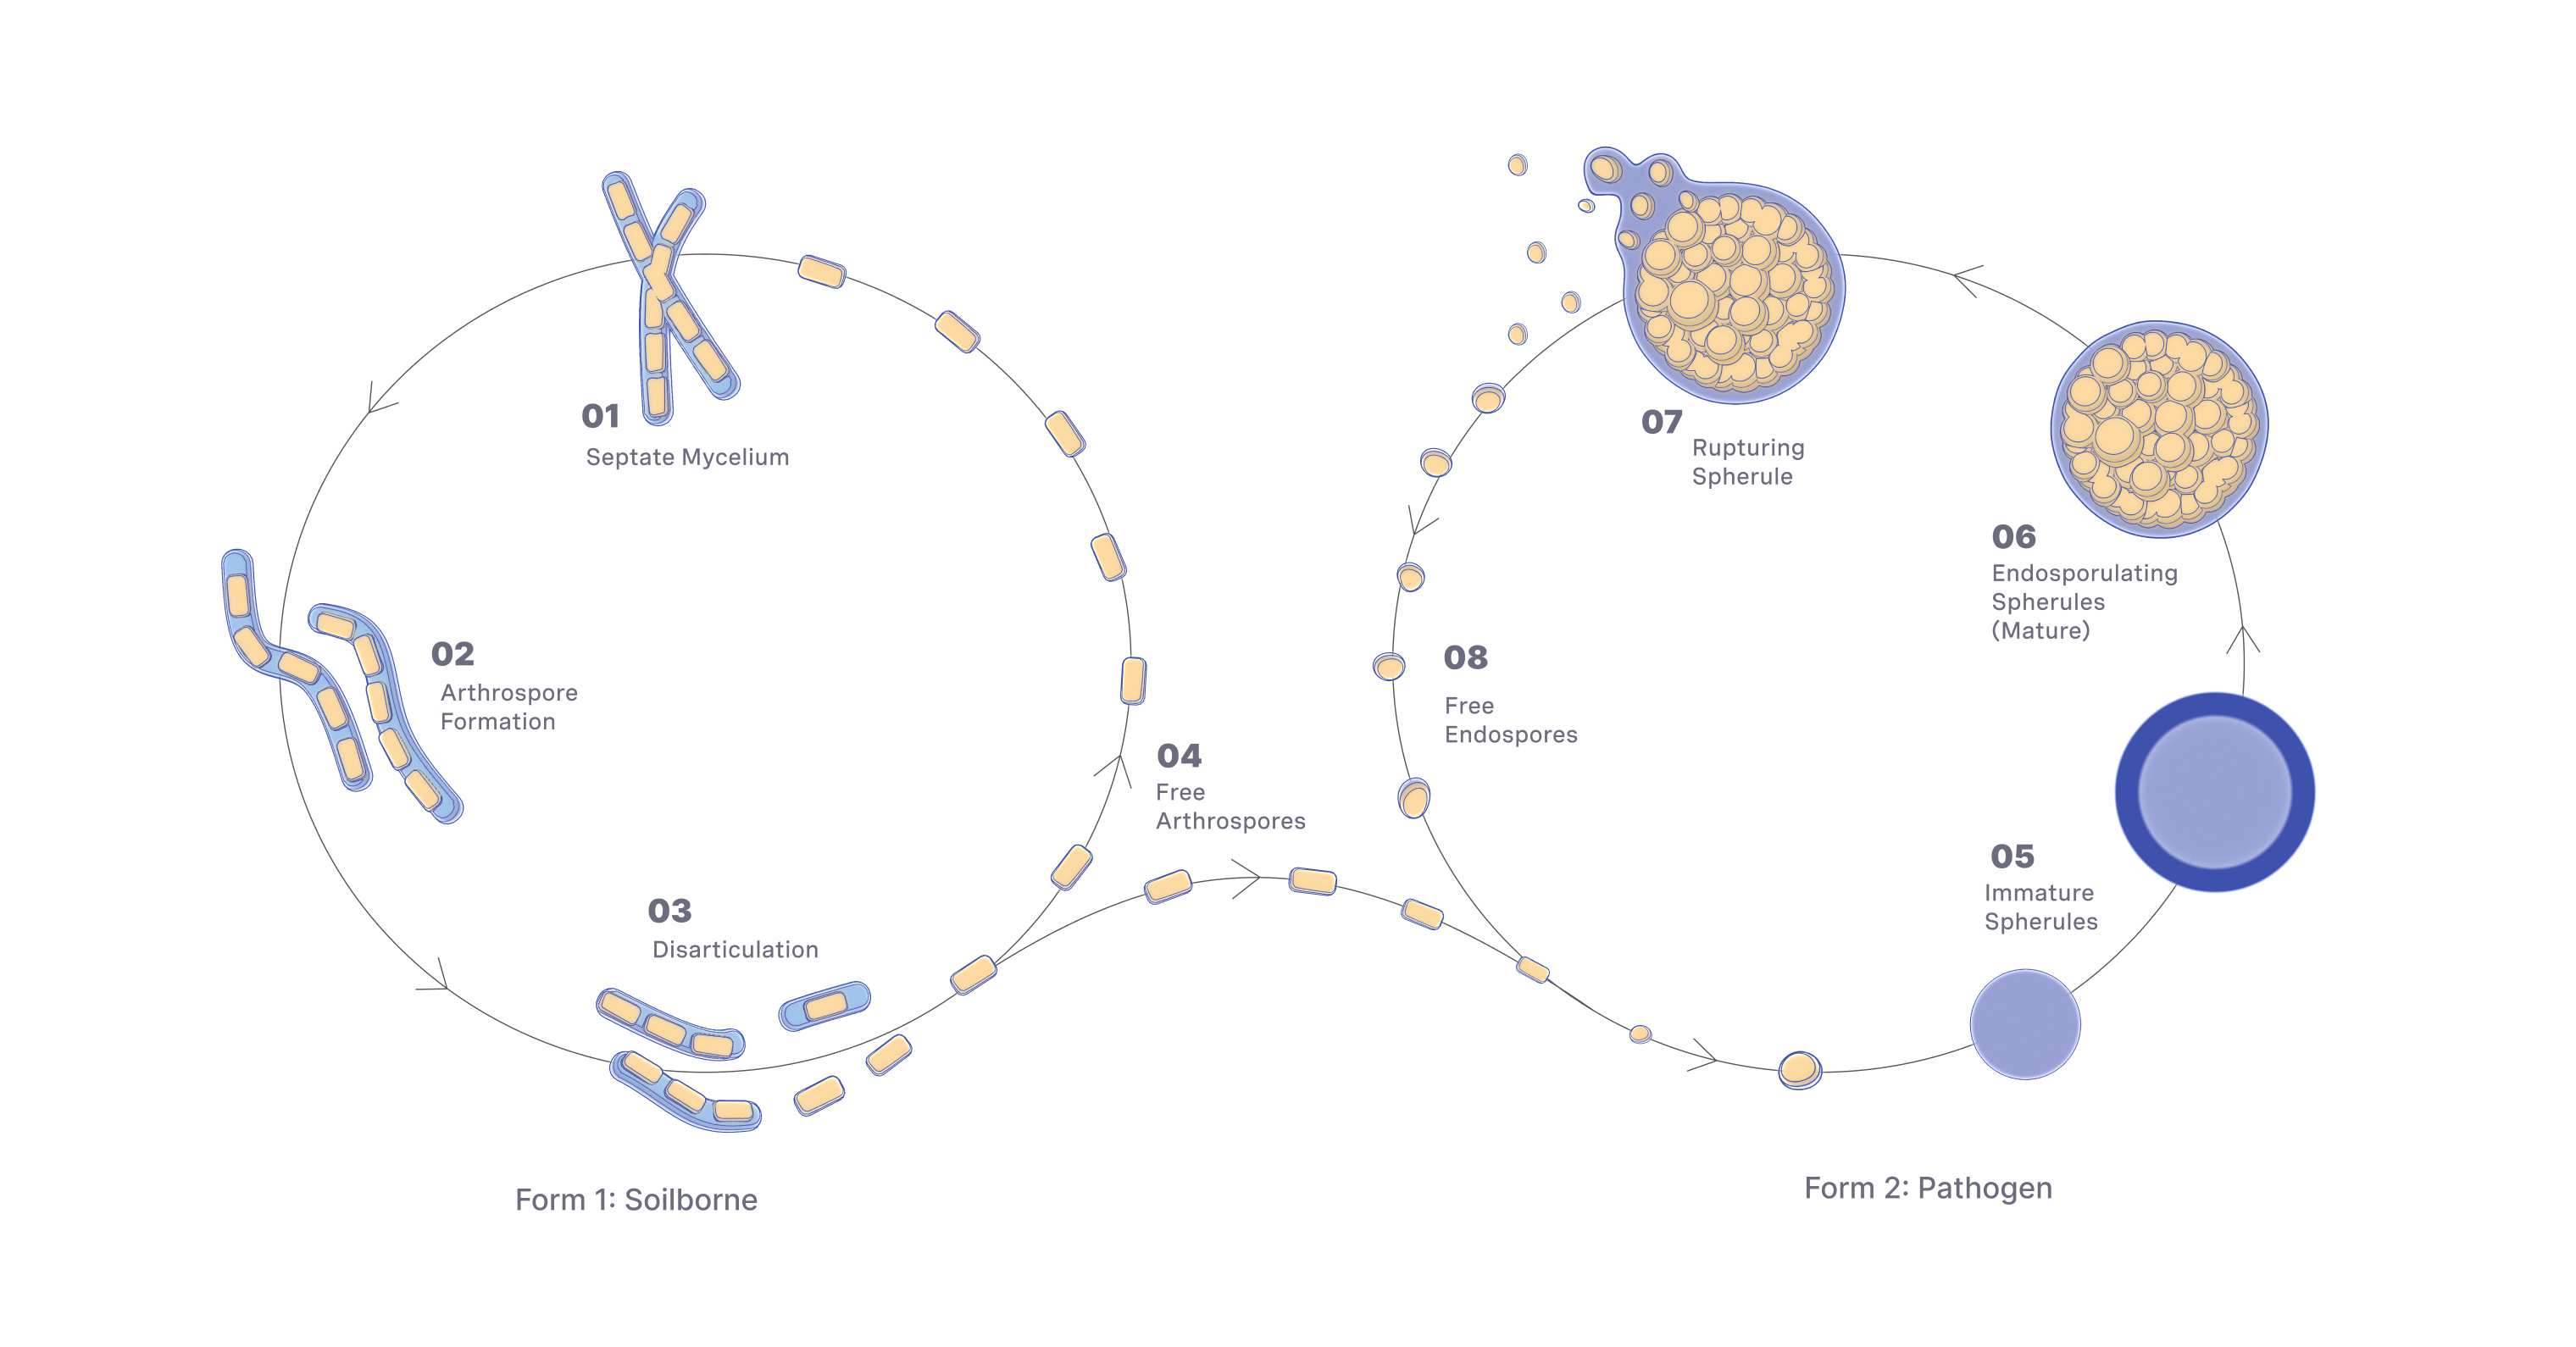 Diagram of the Lifecycle of the Valley Fever fungus